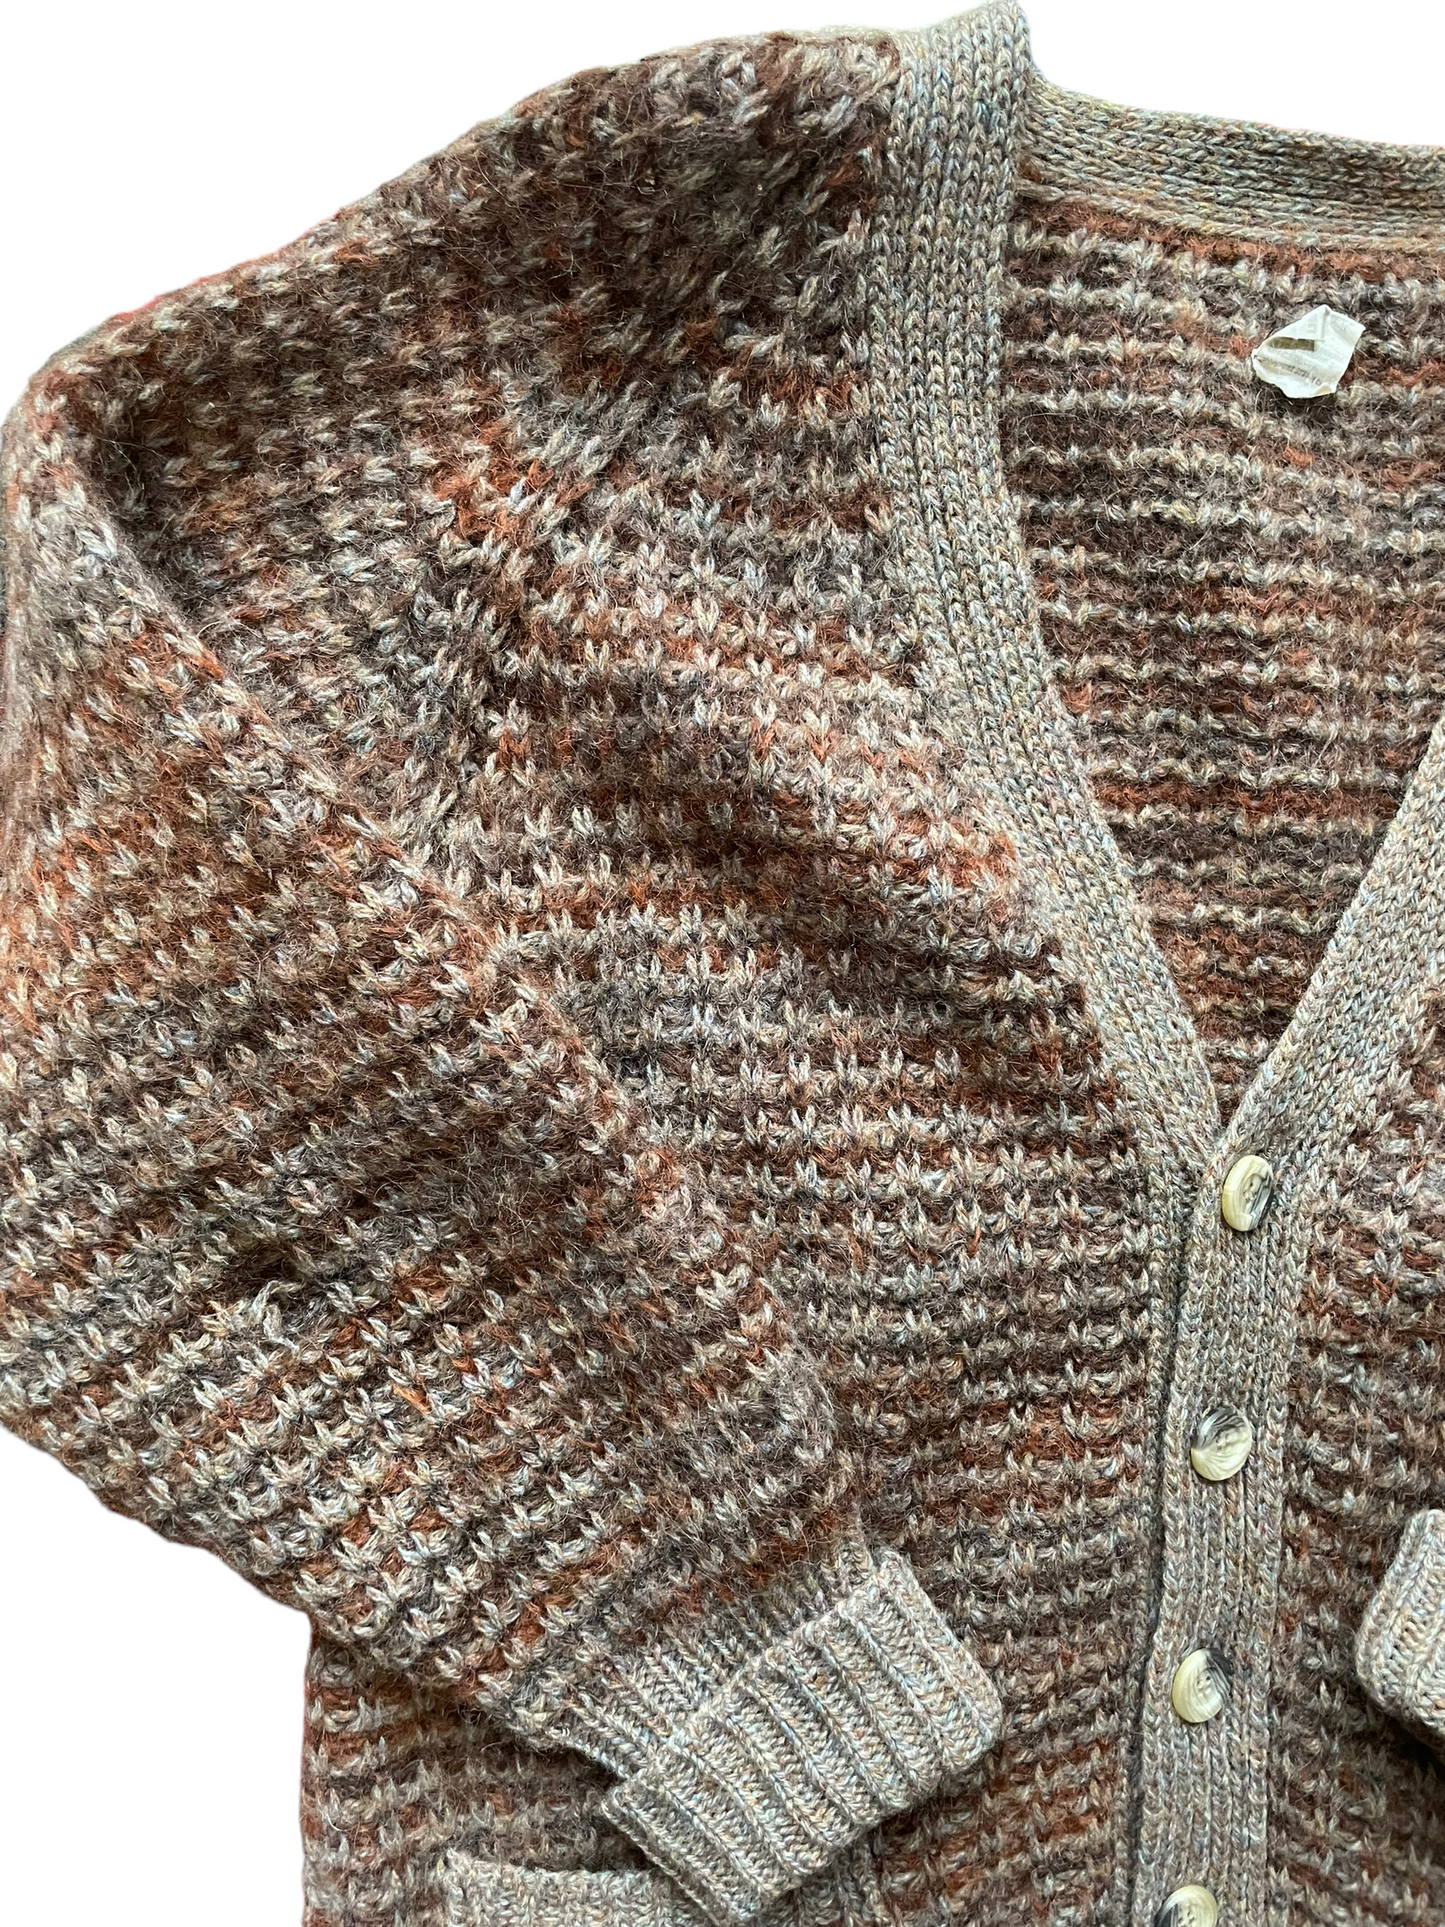 Vintage 1960s Shetland Wool Grampa Cardigan |  Barn Owl Vintage | Seattle Vintage Sweaters Front right side. One hole visible on right sleeve.